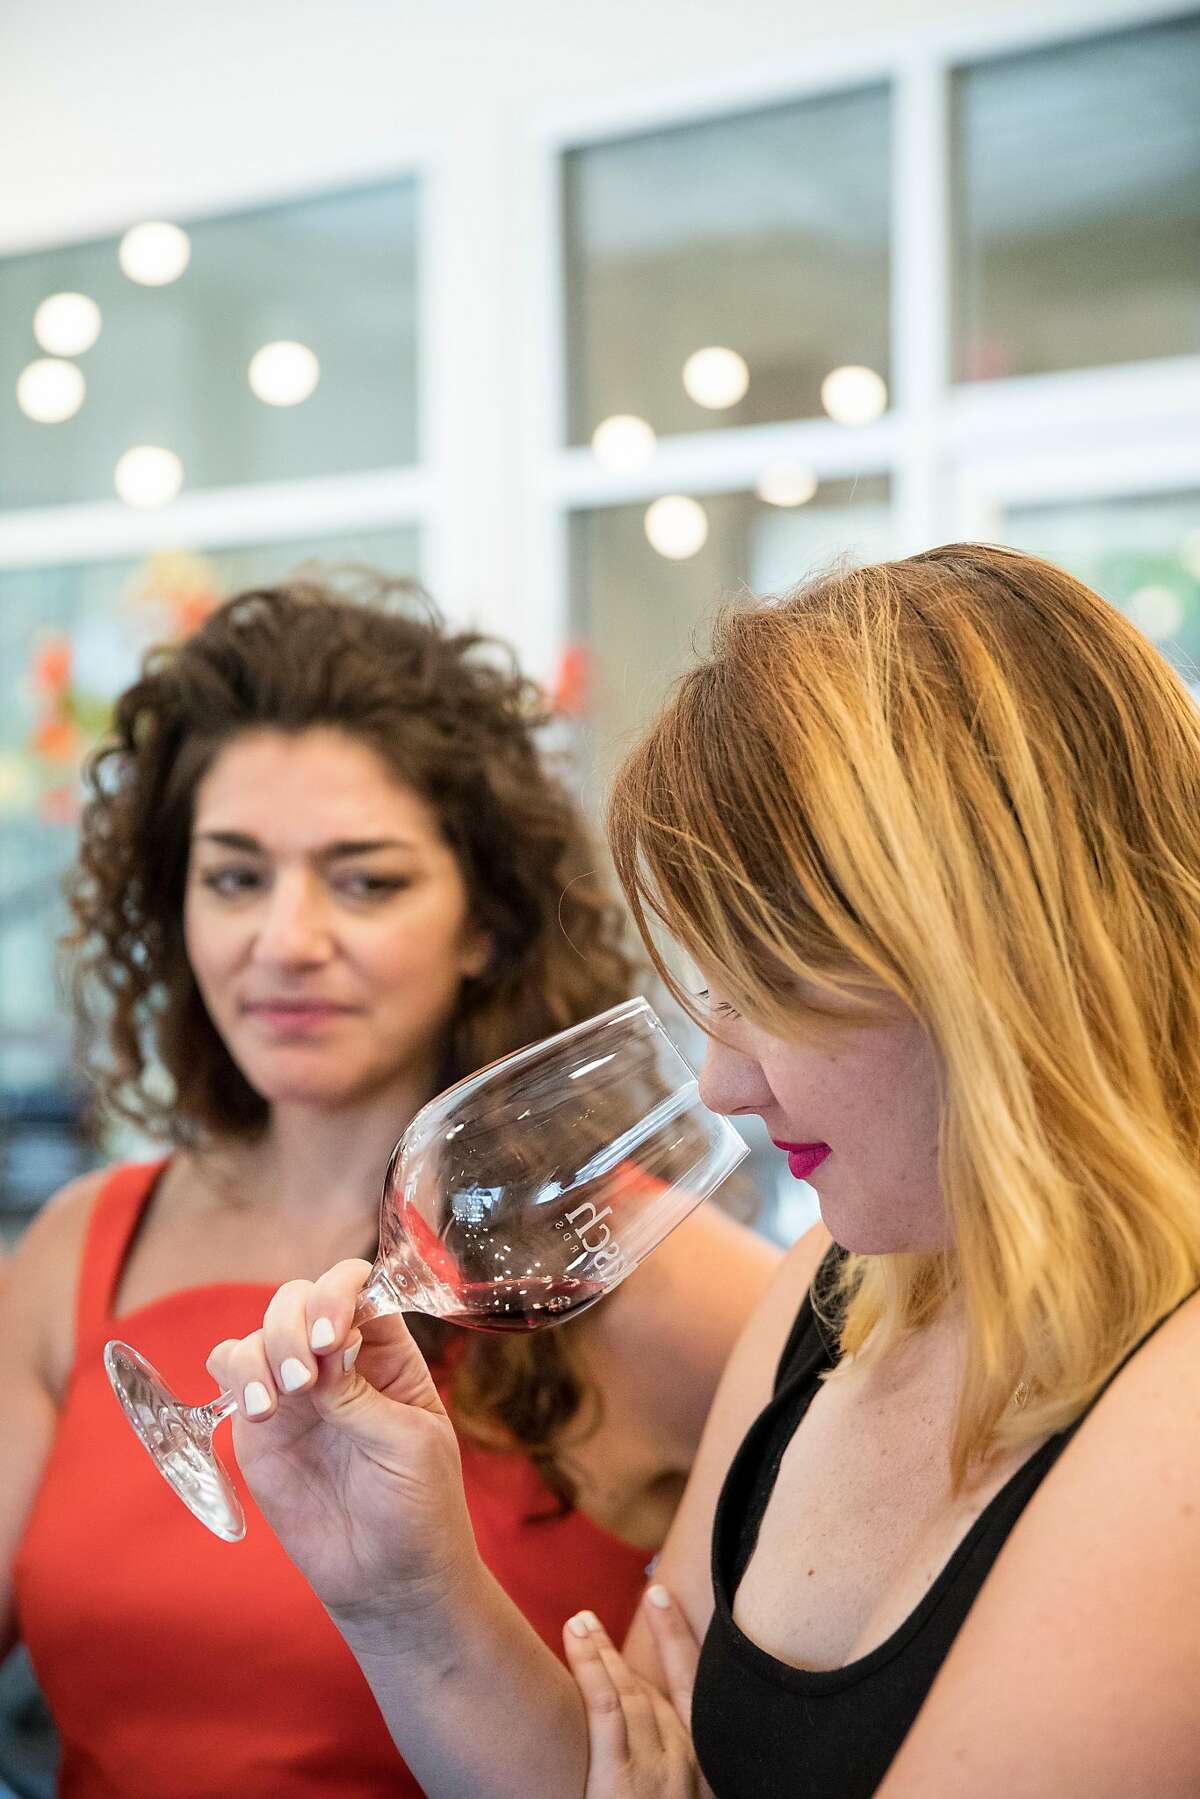 Shana Robinson (left) and Andrea Heap participate in a tasting in the tasting room of Bokisch Vineyards in Lodi, Calif., on Saturday, August 19, 2017. The winery specializes in Spanish varietals and Tizona wines.